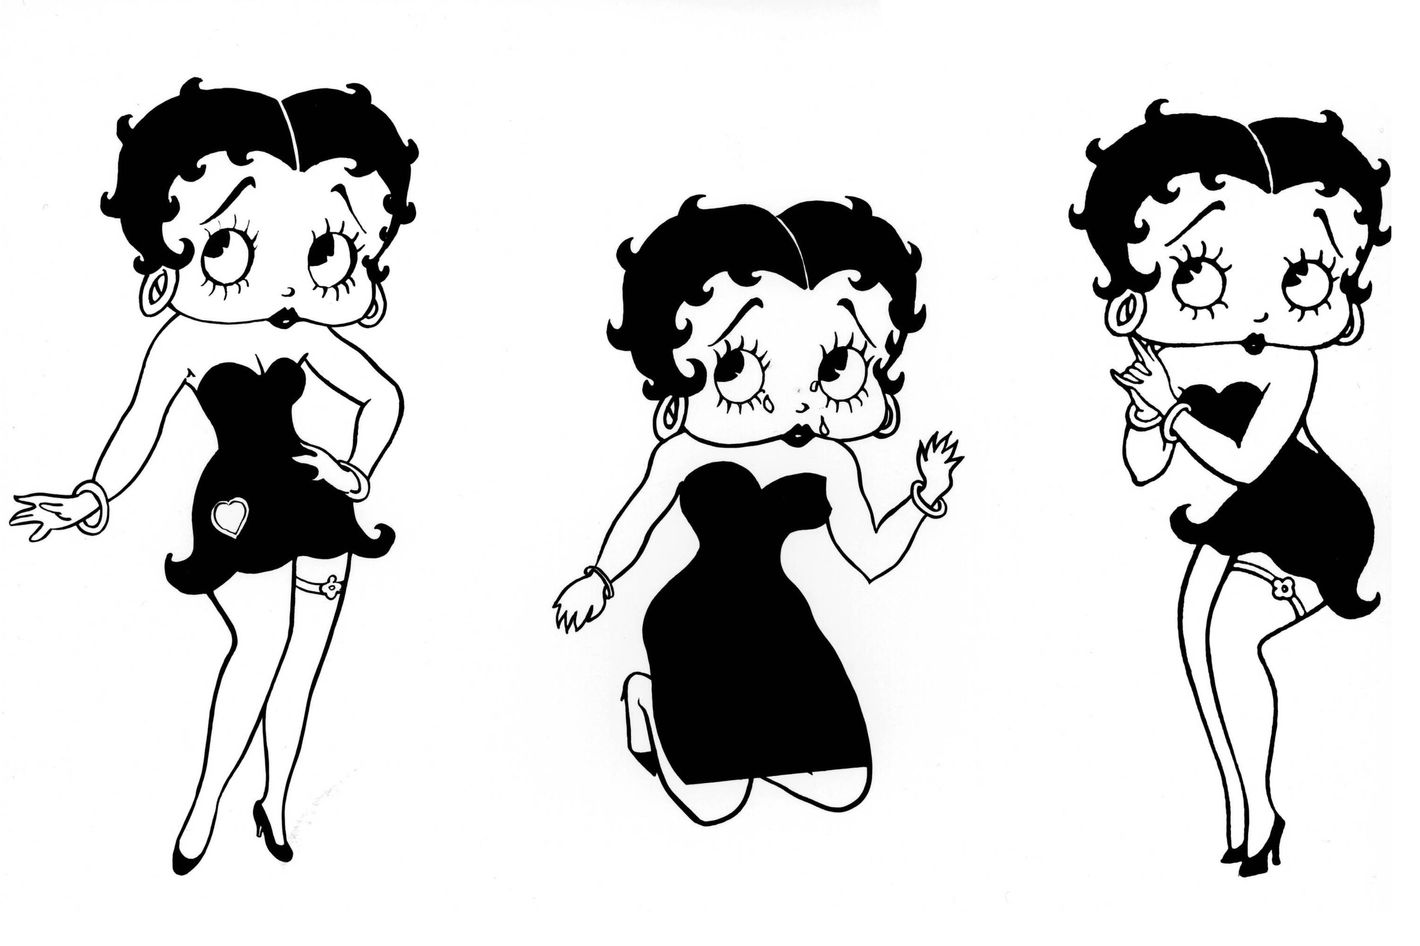 anna maria manna recommends betty boop having sex pic